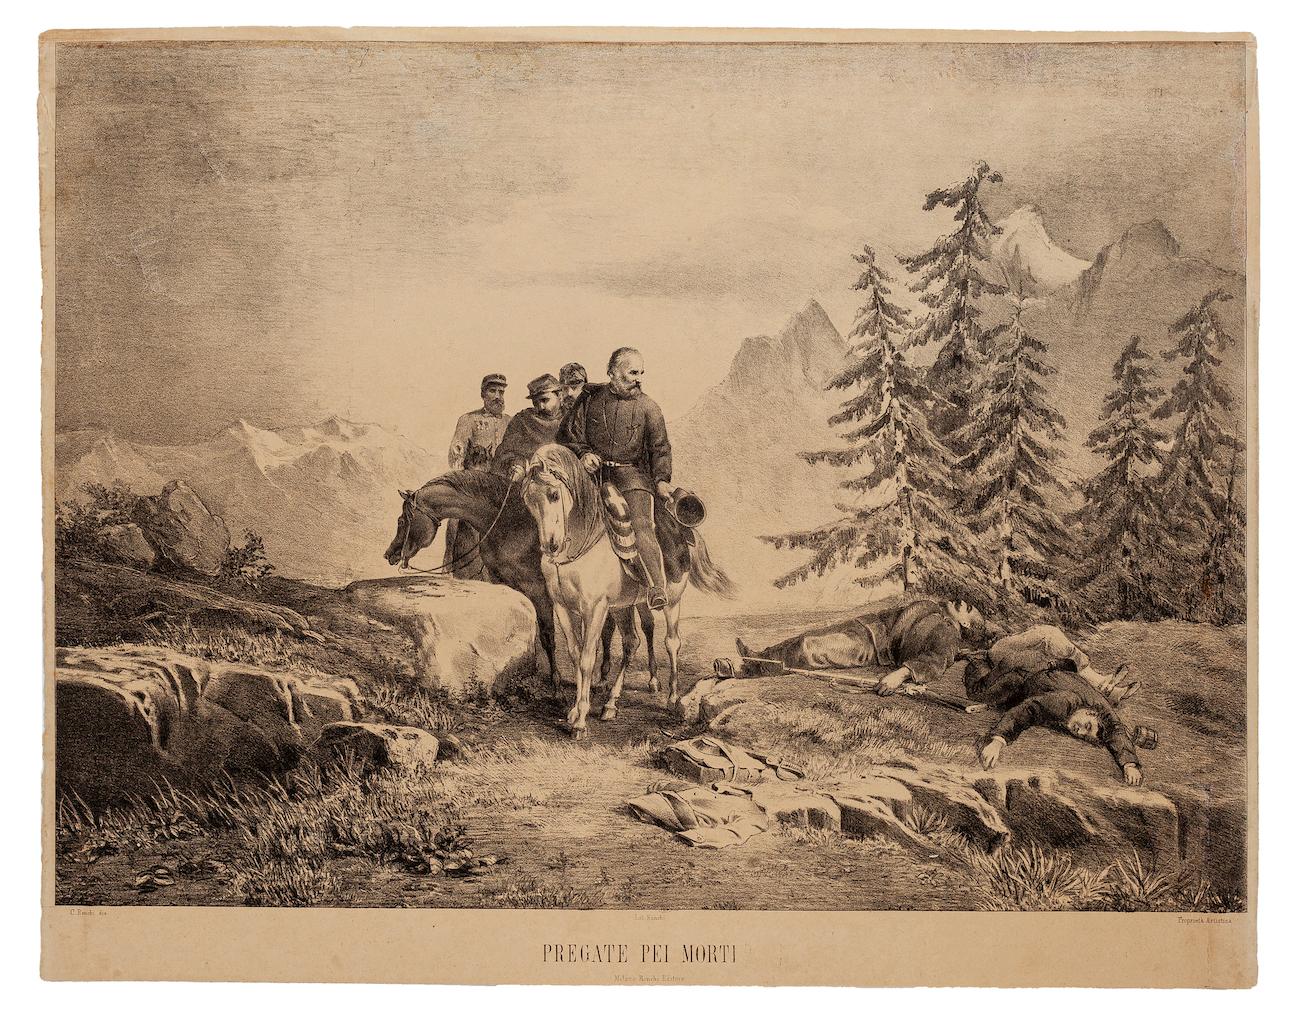 Prey for the Dead (Original Title: pregate per Morti) is an original lithograph realized by C. Ronchi in 1860 ca.

In good condition but aged.

The artwork represents a general, probably Giuseppe Garibaldi, on a horse followed by some of his men,